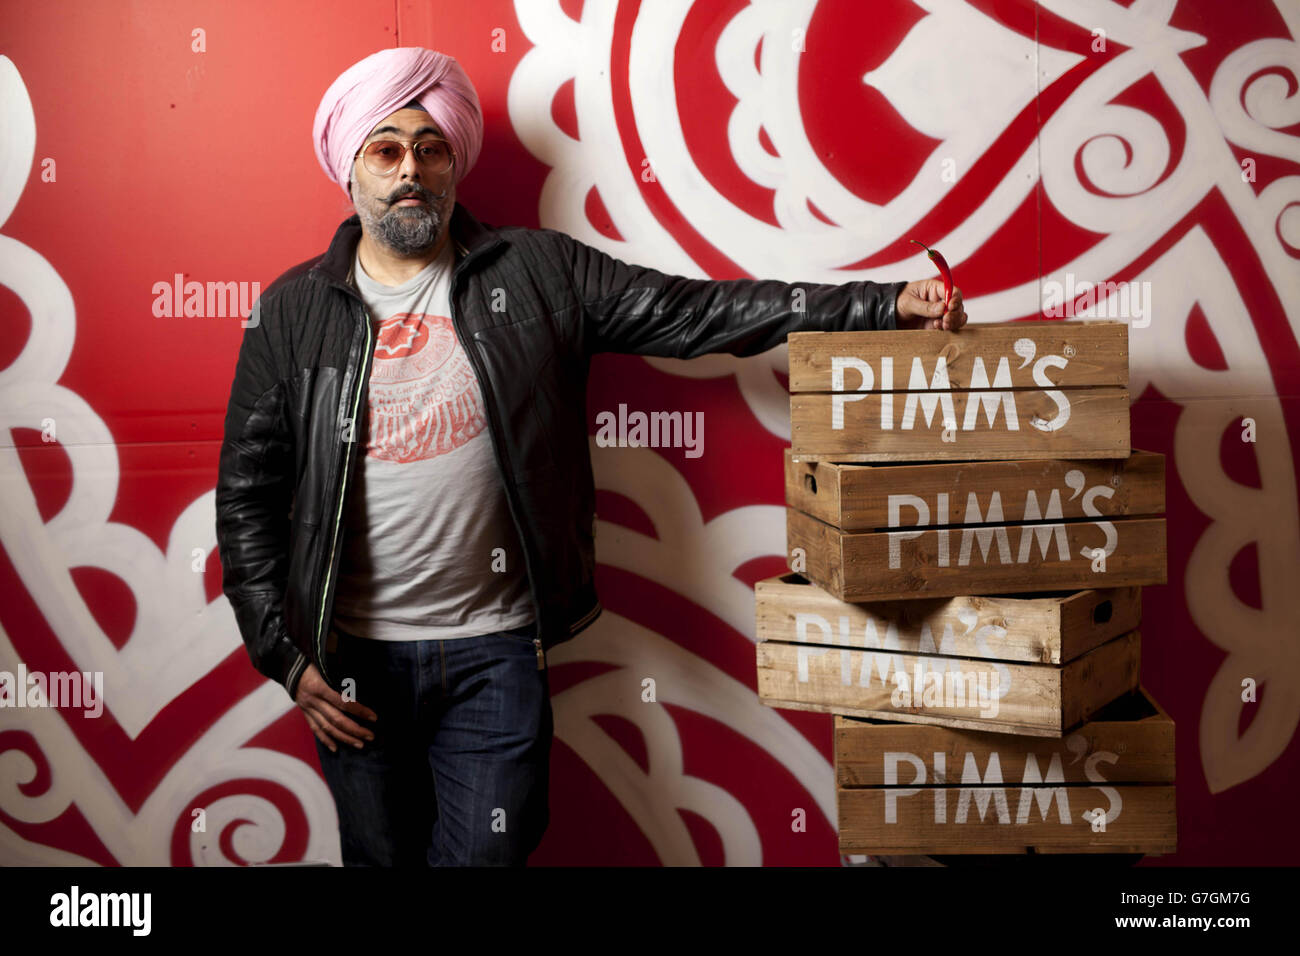 Anglo-Indian chef and comedian Hardeep Singh Kohli at the Pukka Pimm's Pop-up restaurant on 133 Bethnal Green Road, east London. PRESS ASSOCIATION Photo. Picture date: Thursday December 4, 2014. According to Pimm's, the biggest secret for curry-house enthusiasts across the country is a refreshing glass of Pimm's making it the perfect companion for an Indian curry. Open to the public from 12pm-6pm on Saturday 6th December 2014. Photo credit should read: David Parry/PA Wire Stock Photo